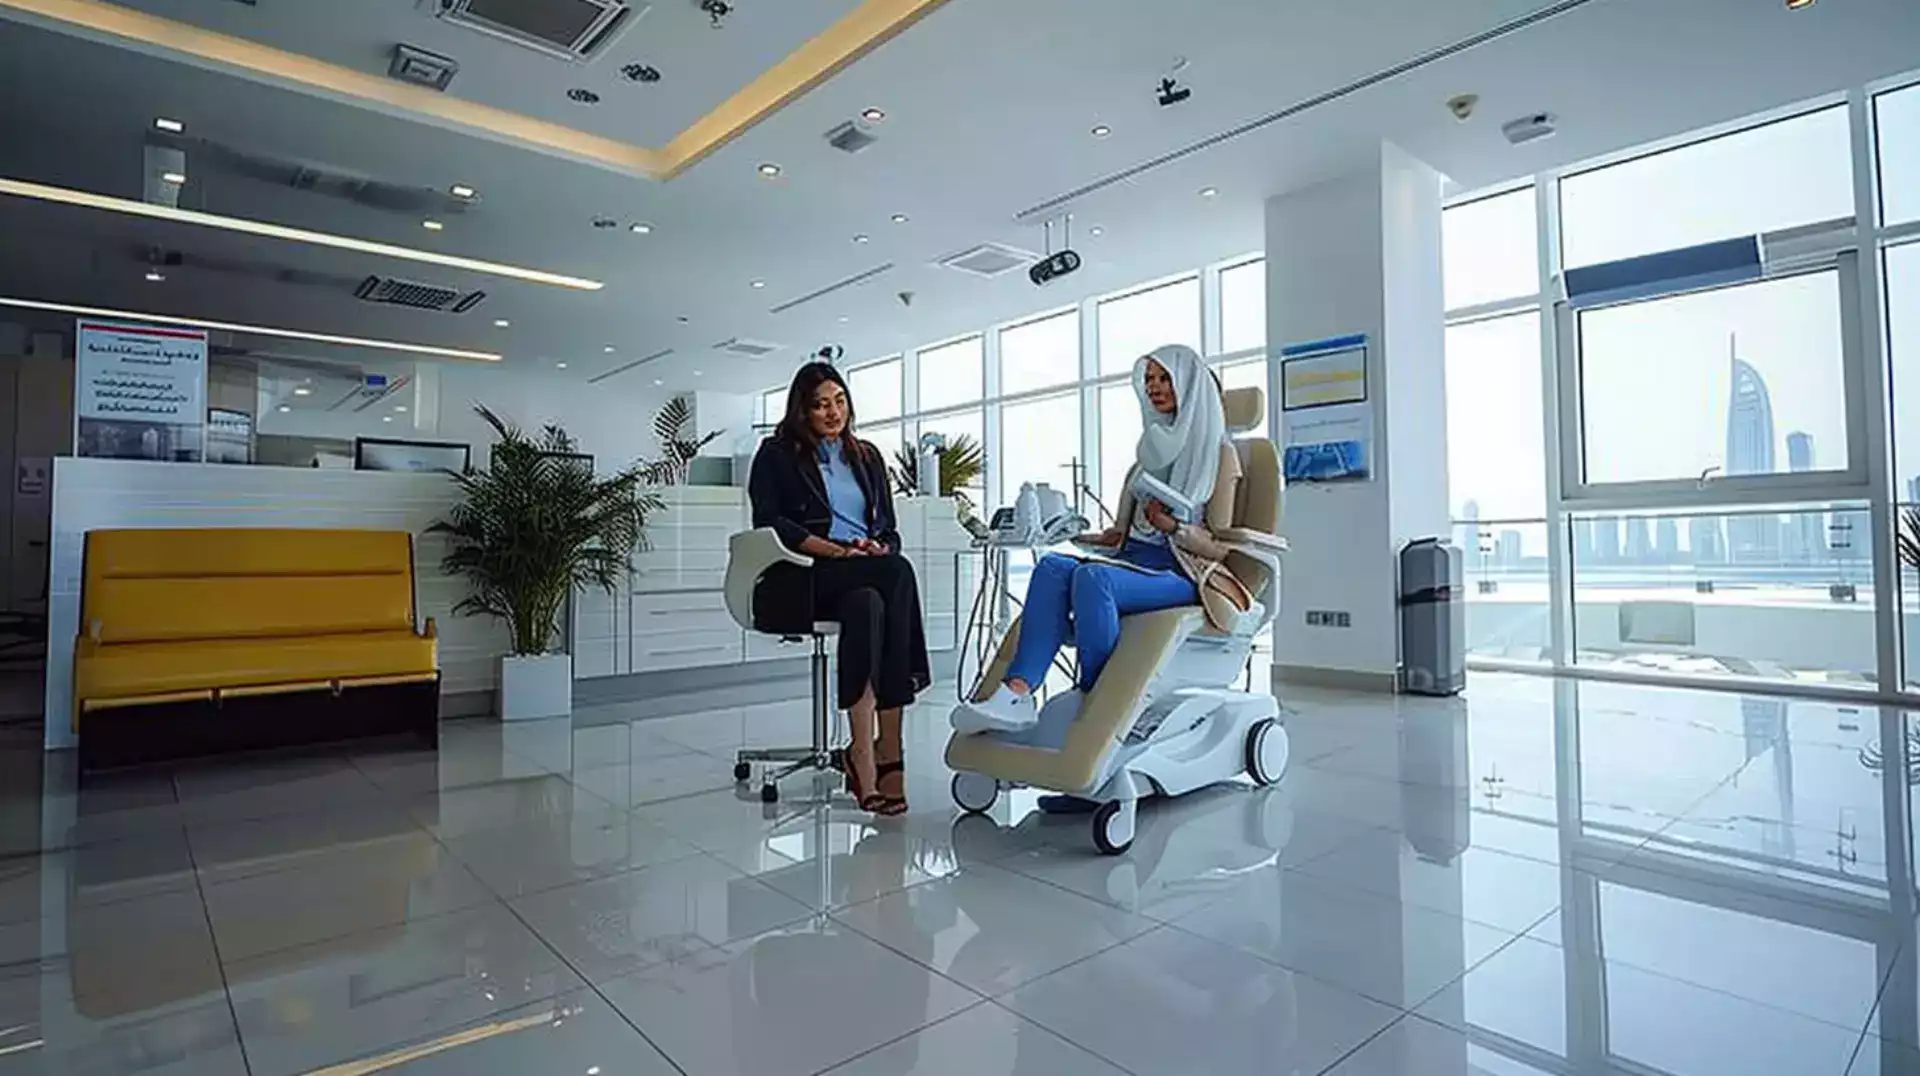 Image capturing Dubai's healthcare excellence, highlighting the city's role as a premier medical tourism hub